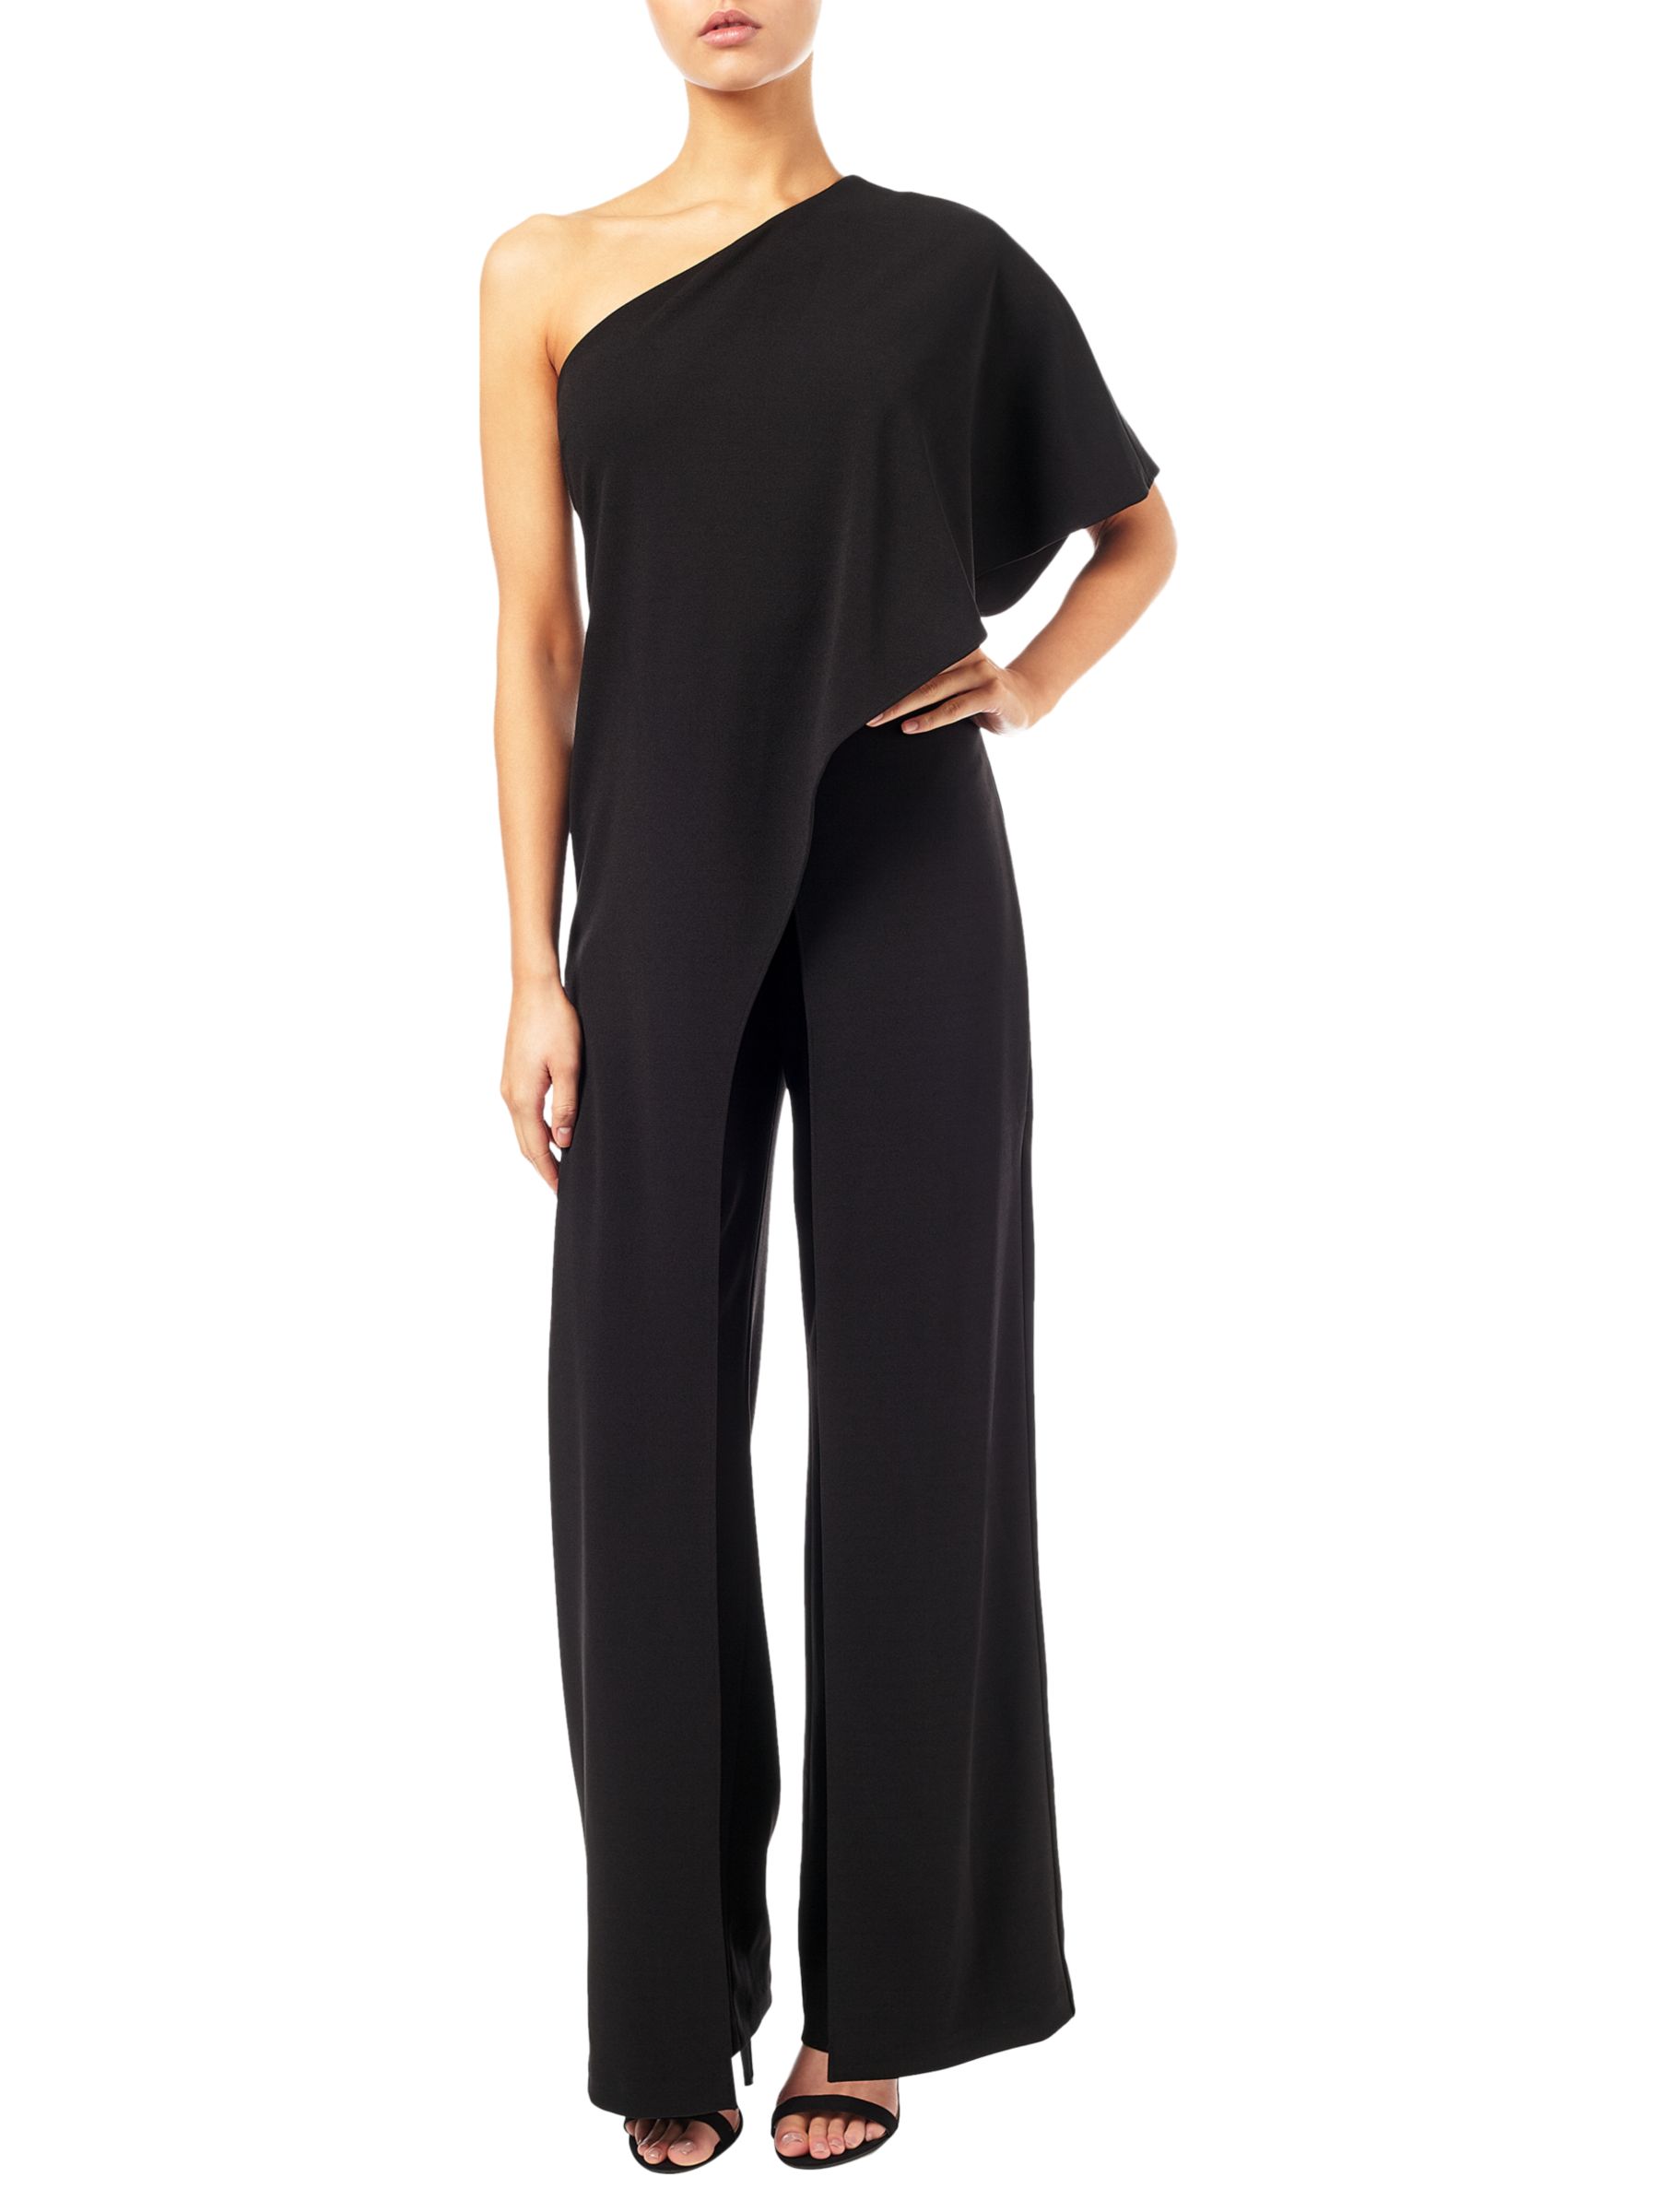 Adrianna Papell One Shoulder Jumpsuit at John Lewis